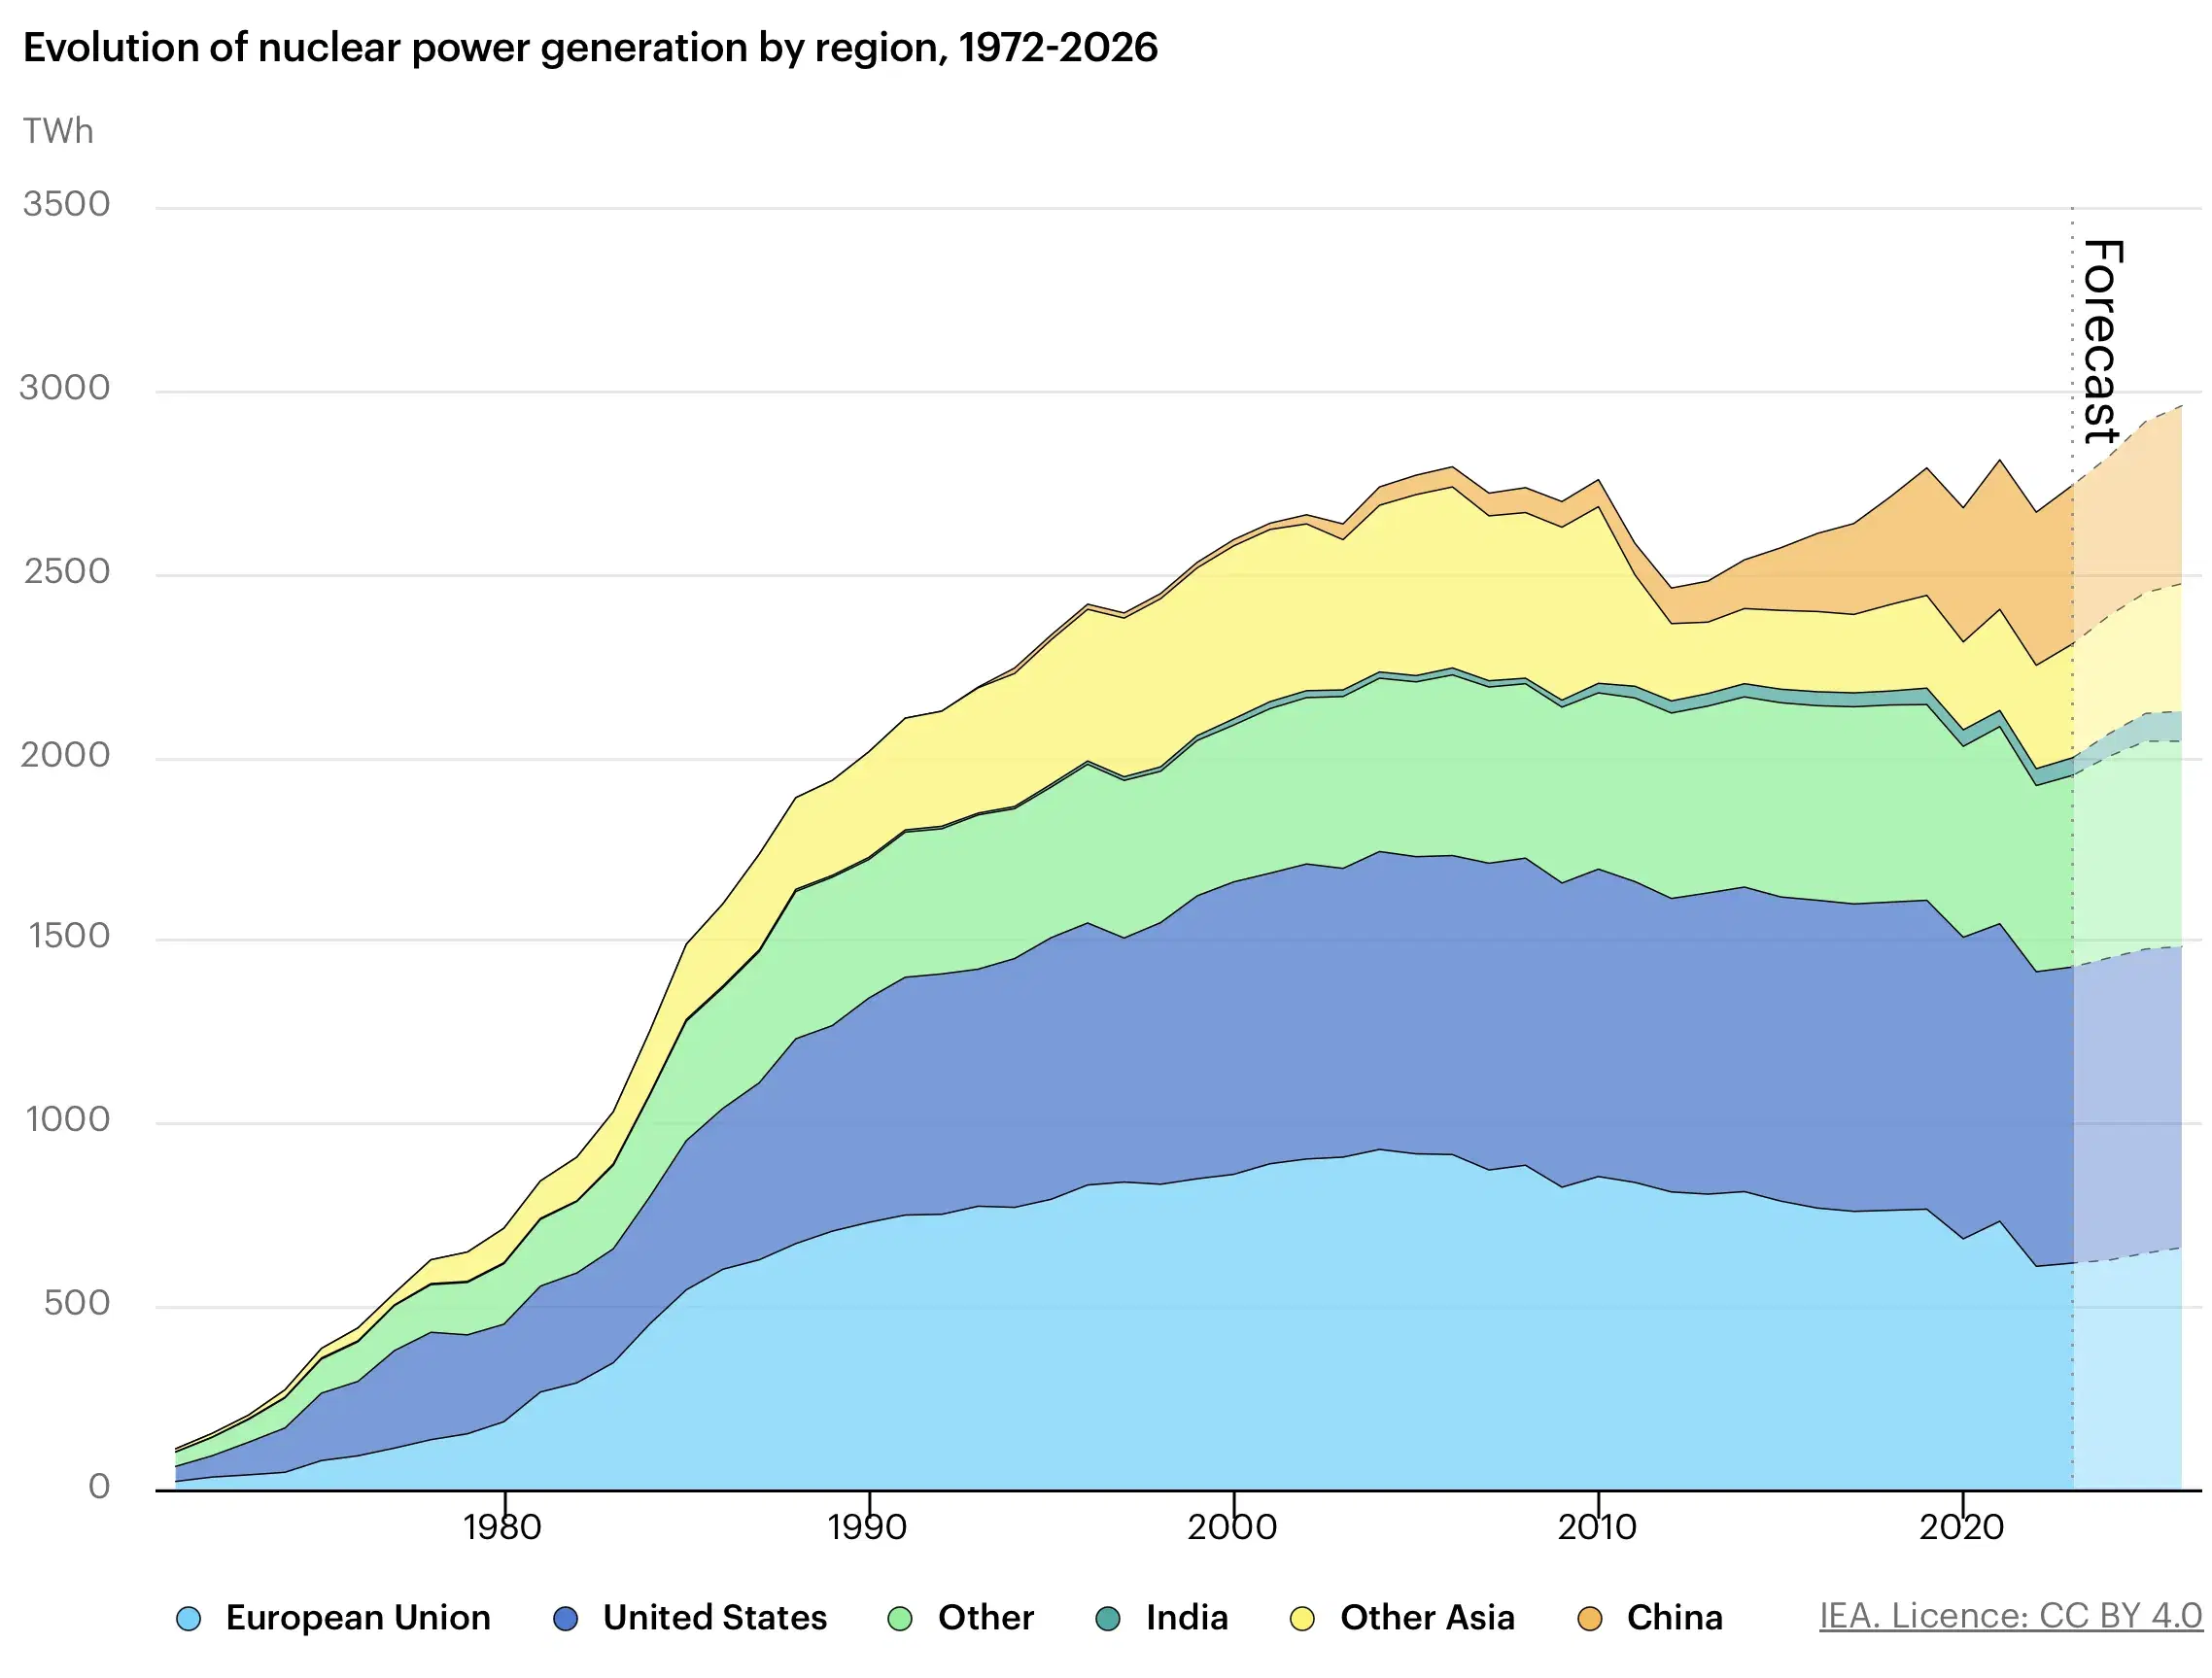 The Evolution of Nuclear Power Generation by Region, 1972-2026